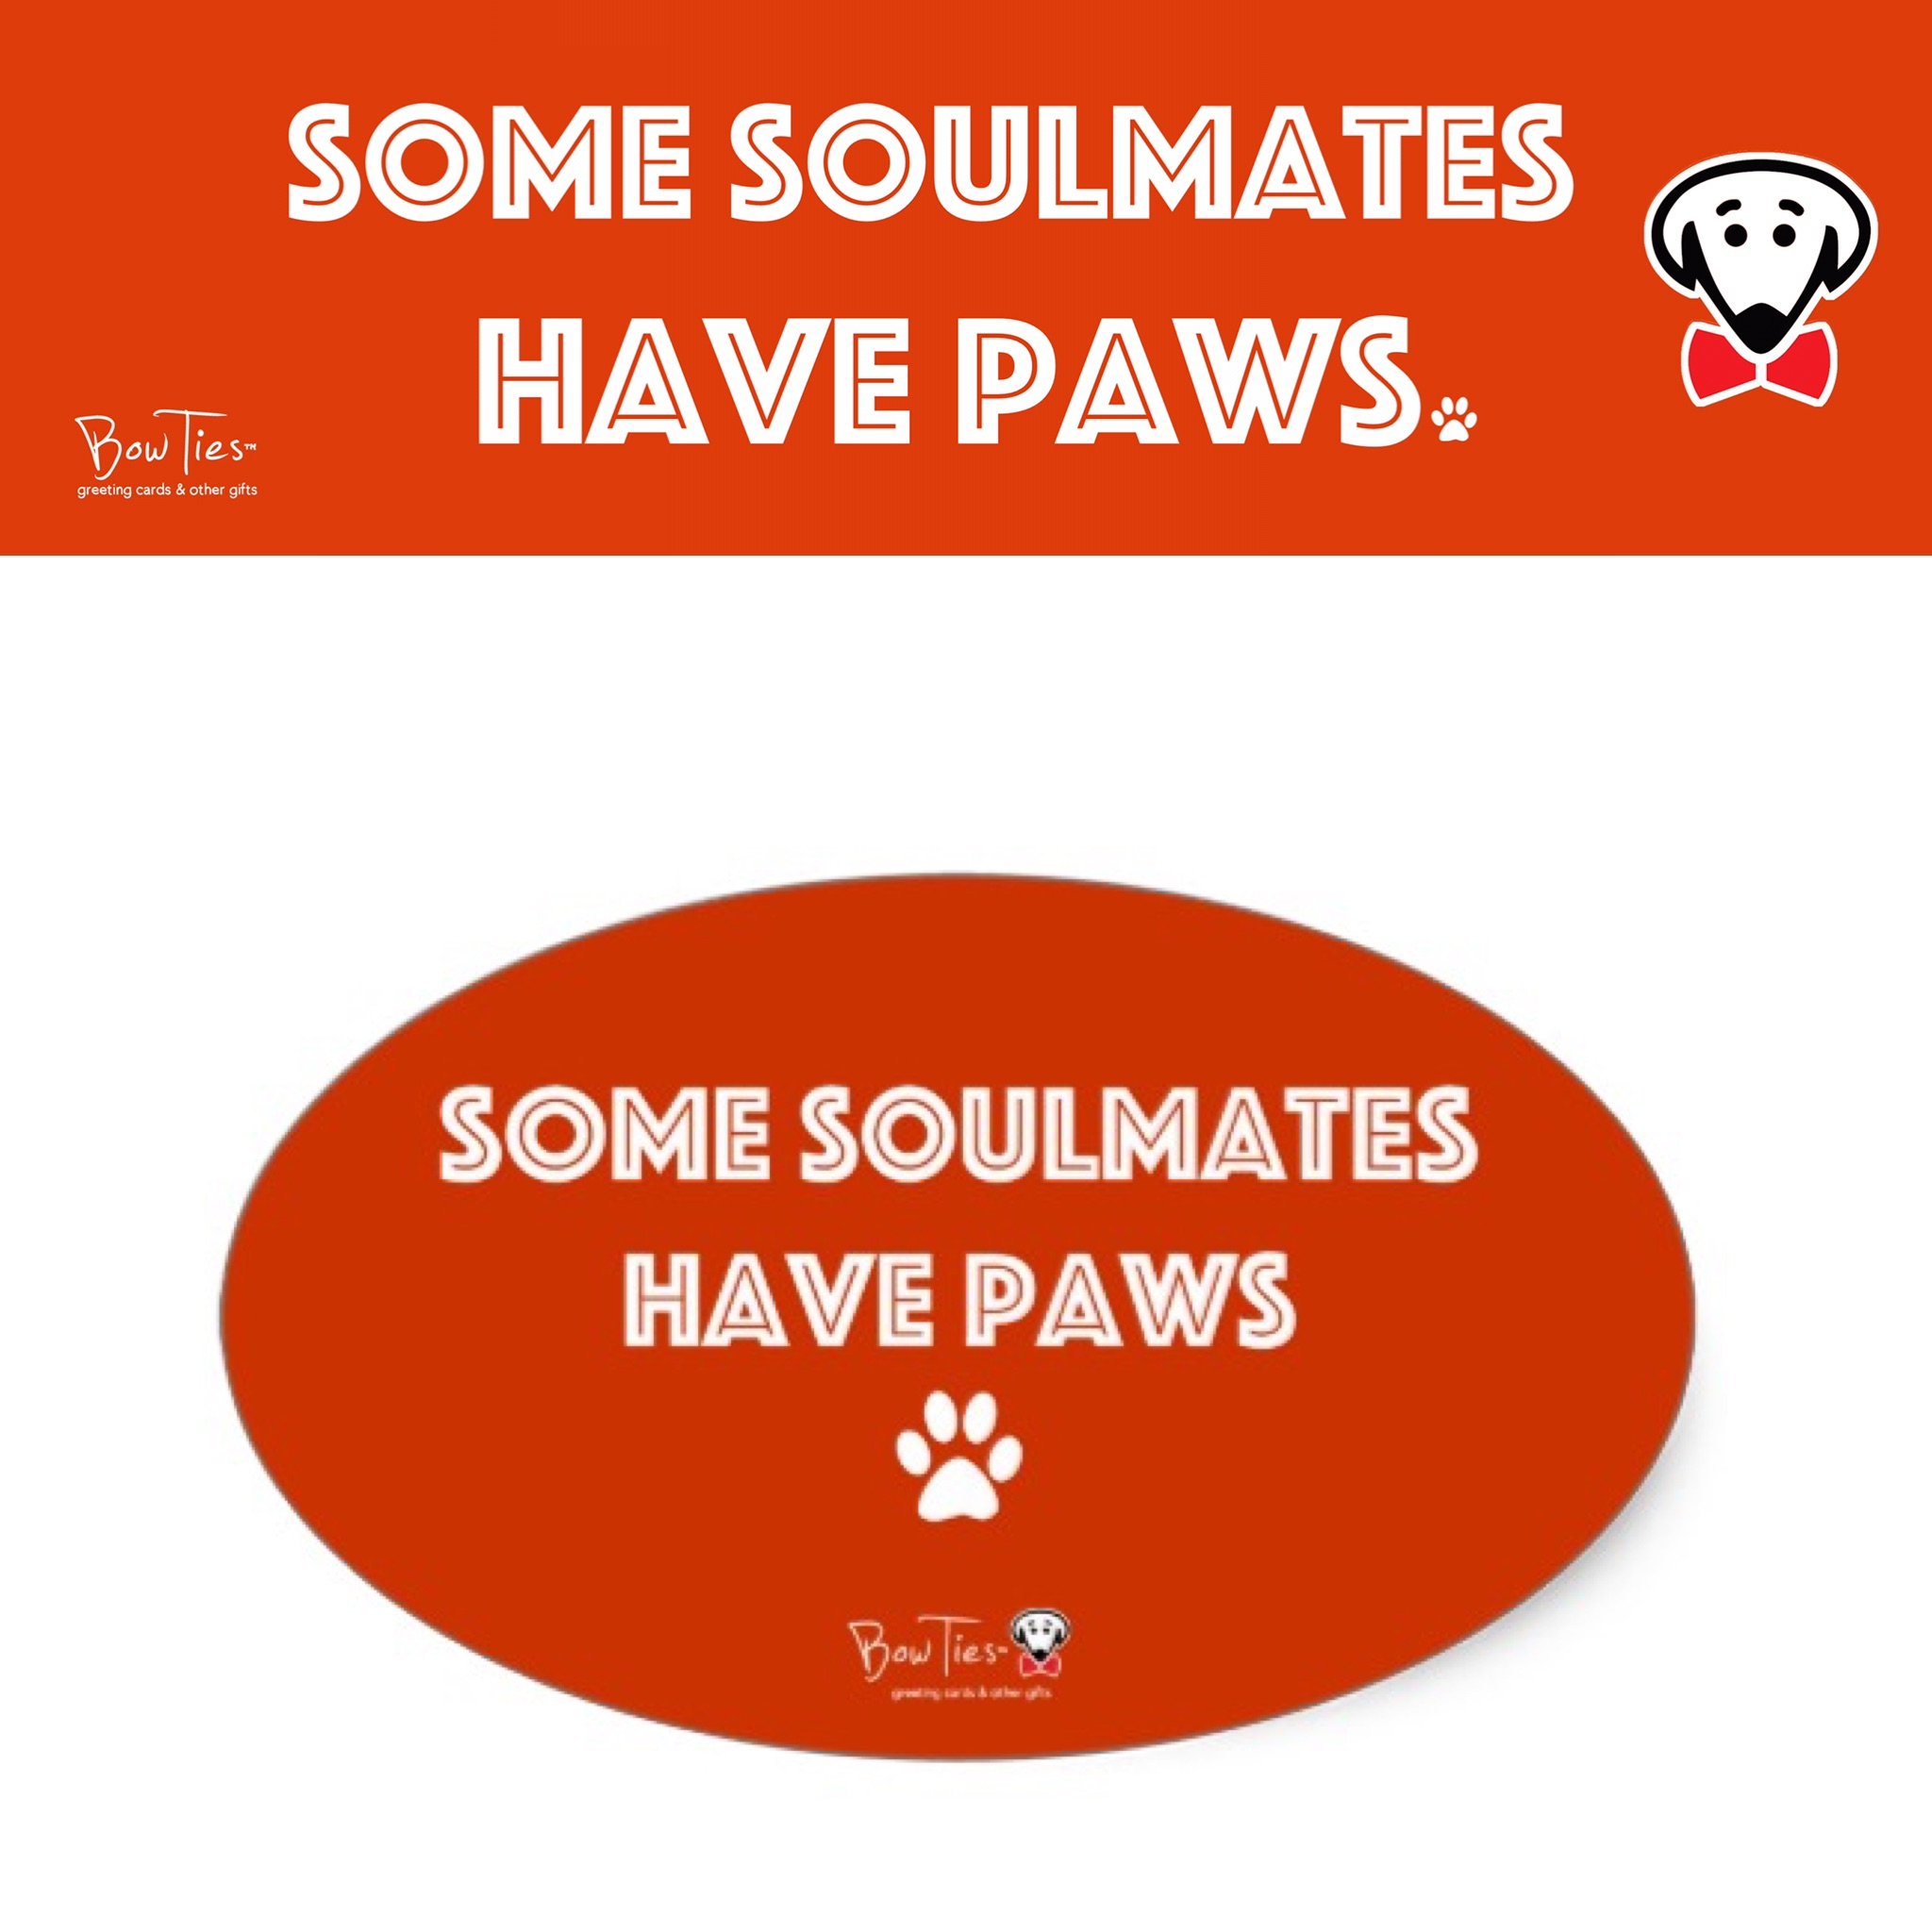 Some soulmates have paws – sticker